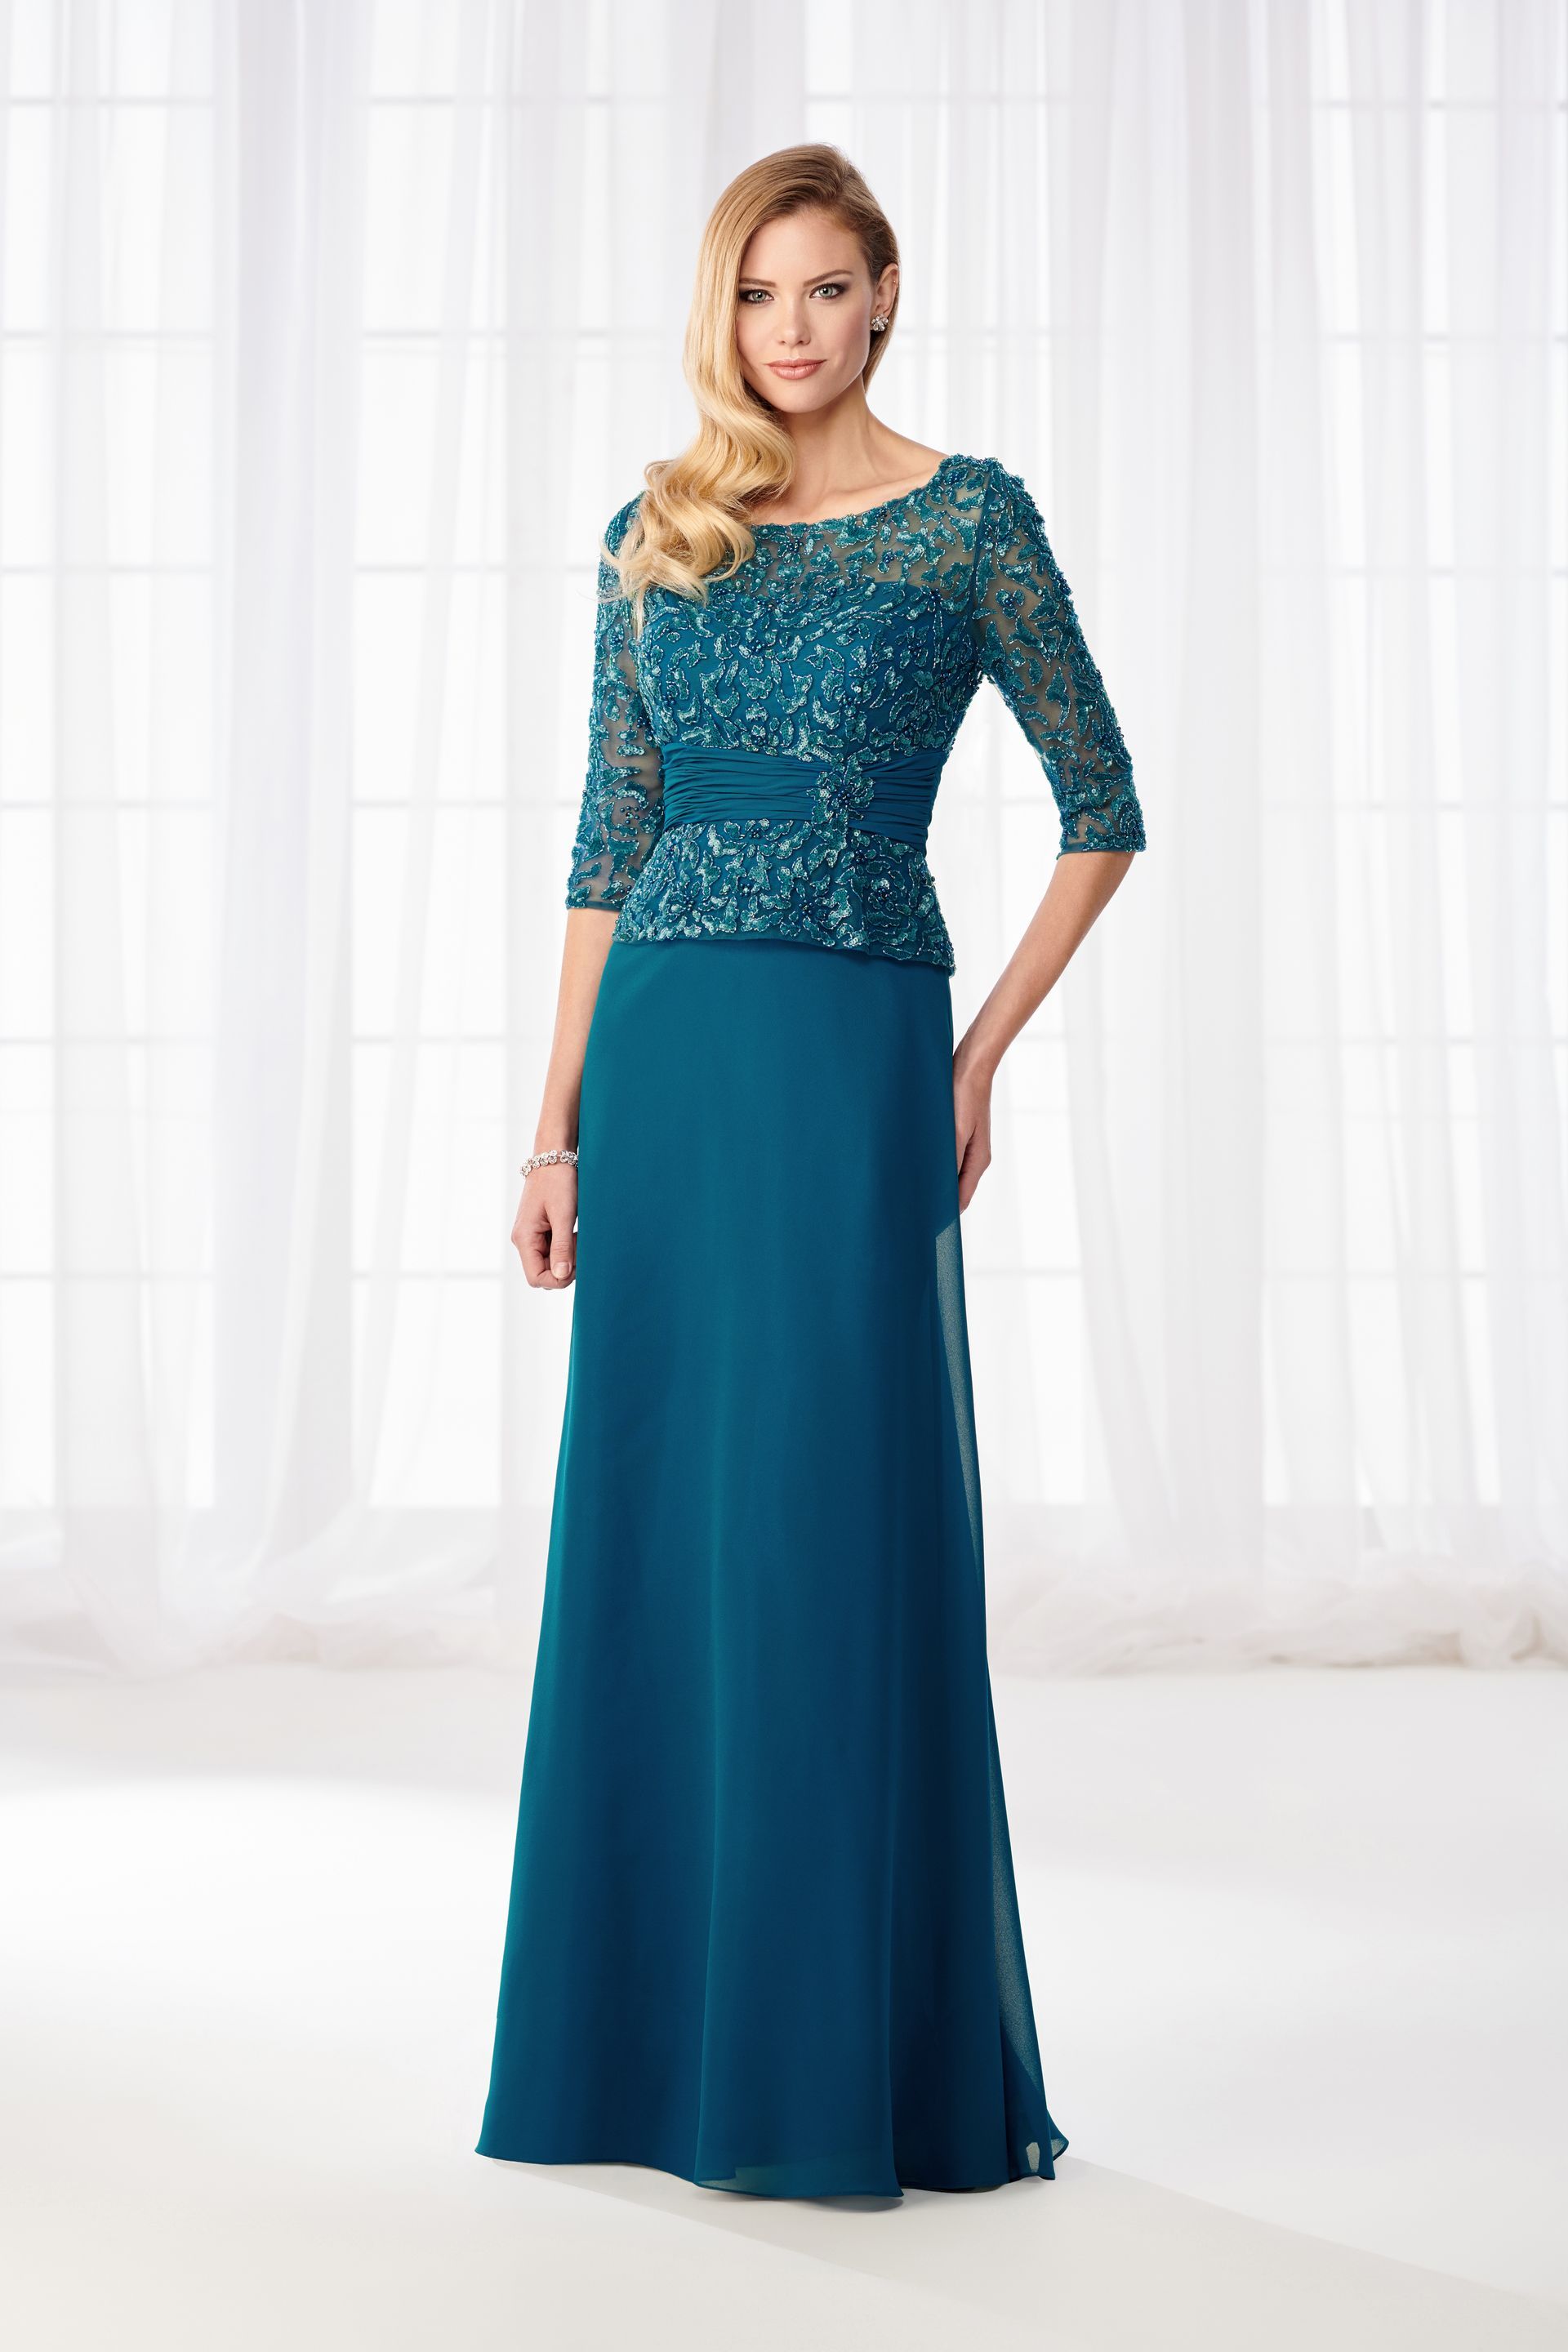 A woman is wearing a teal mother of the bride dress.